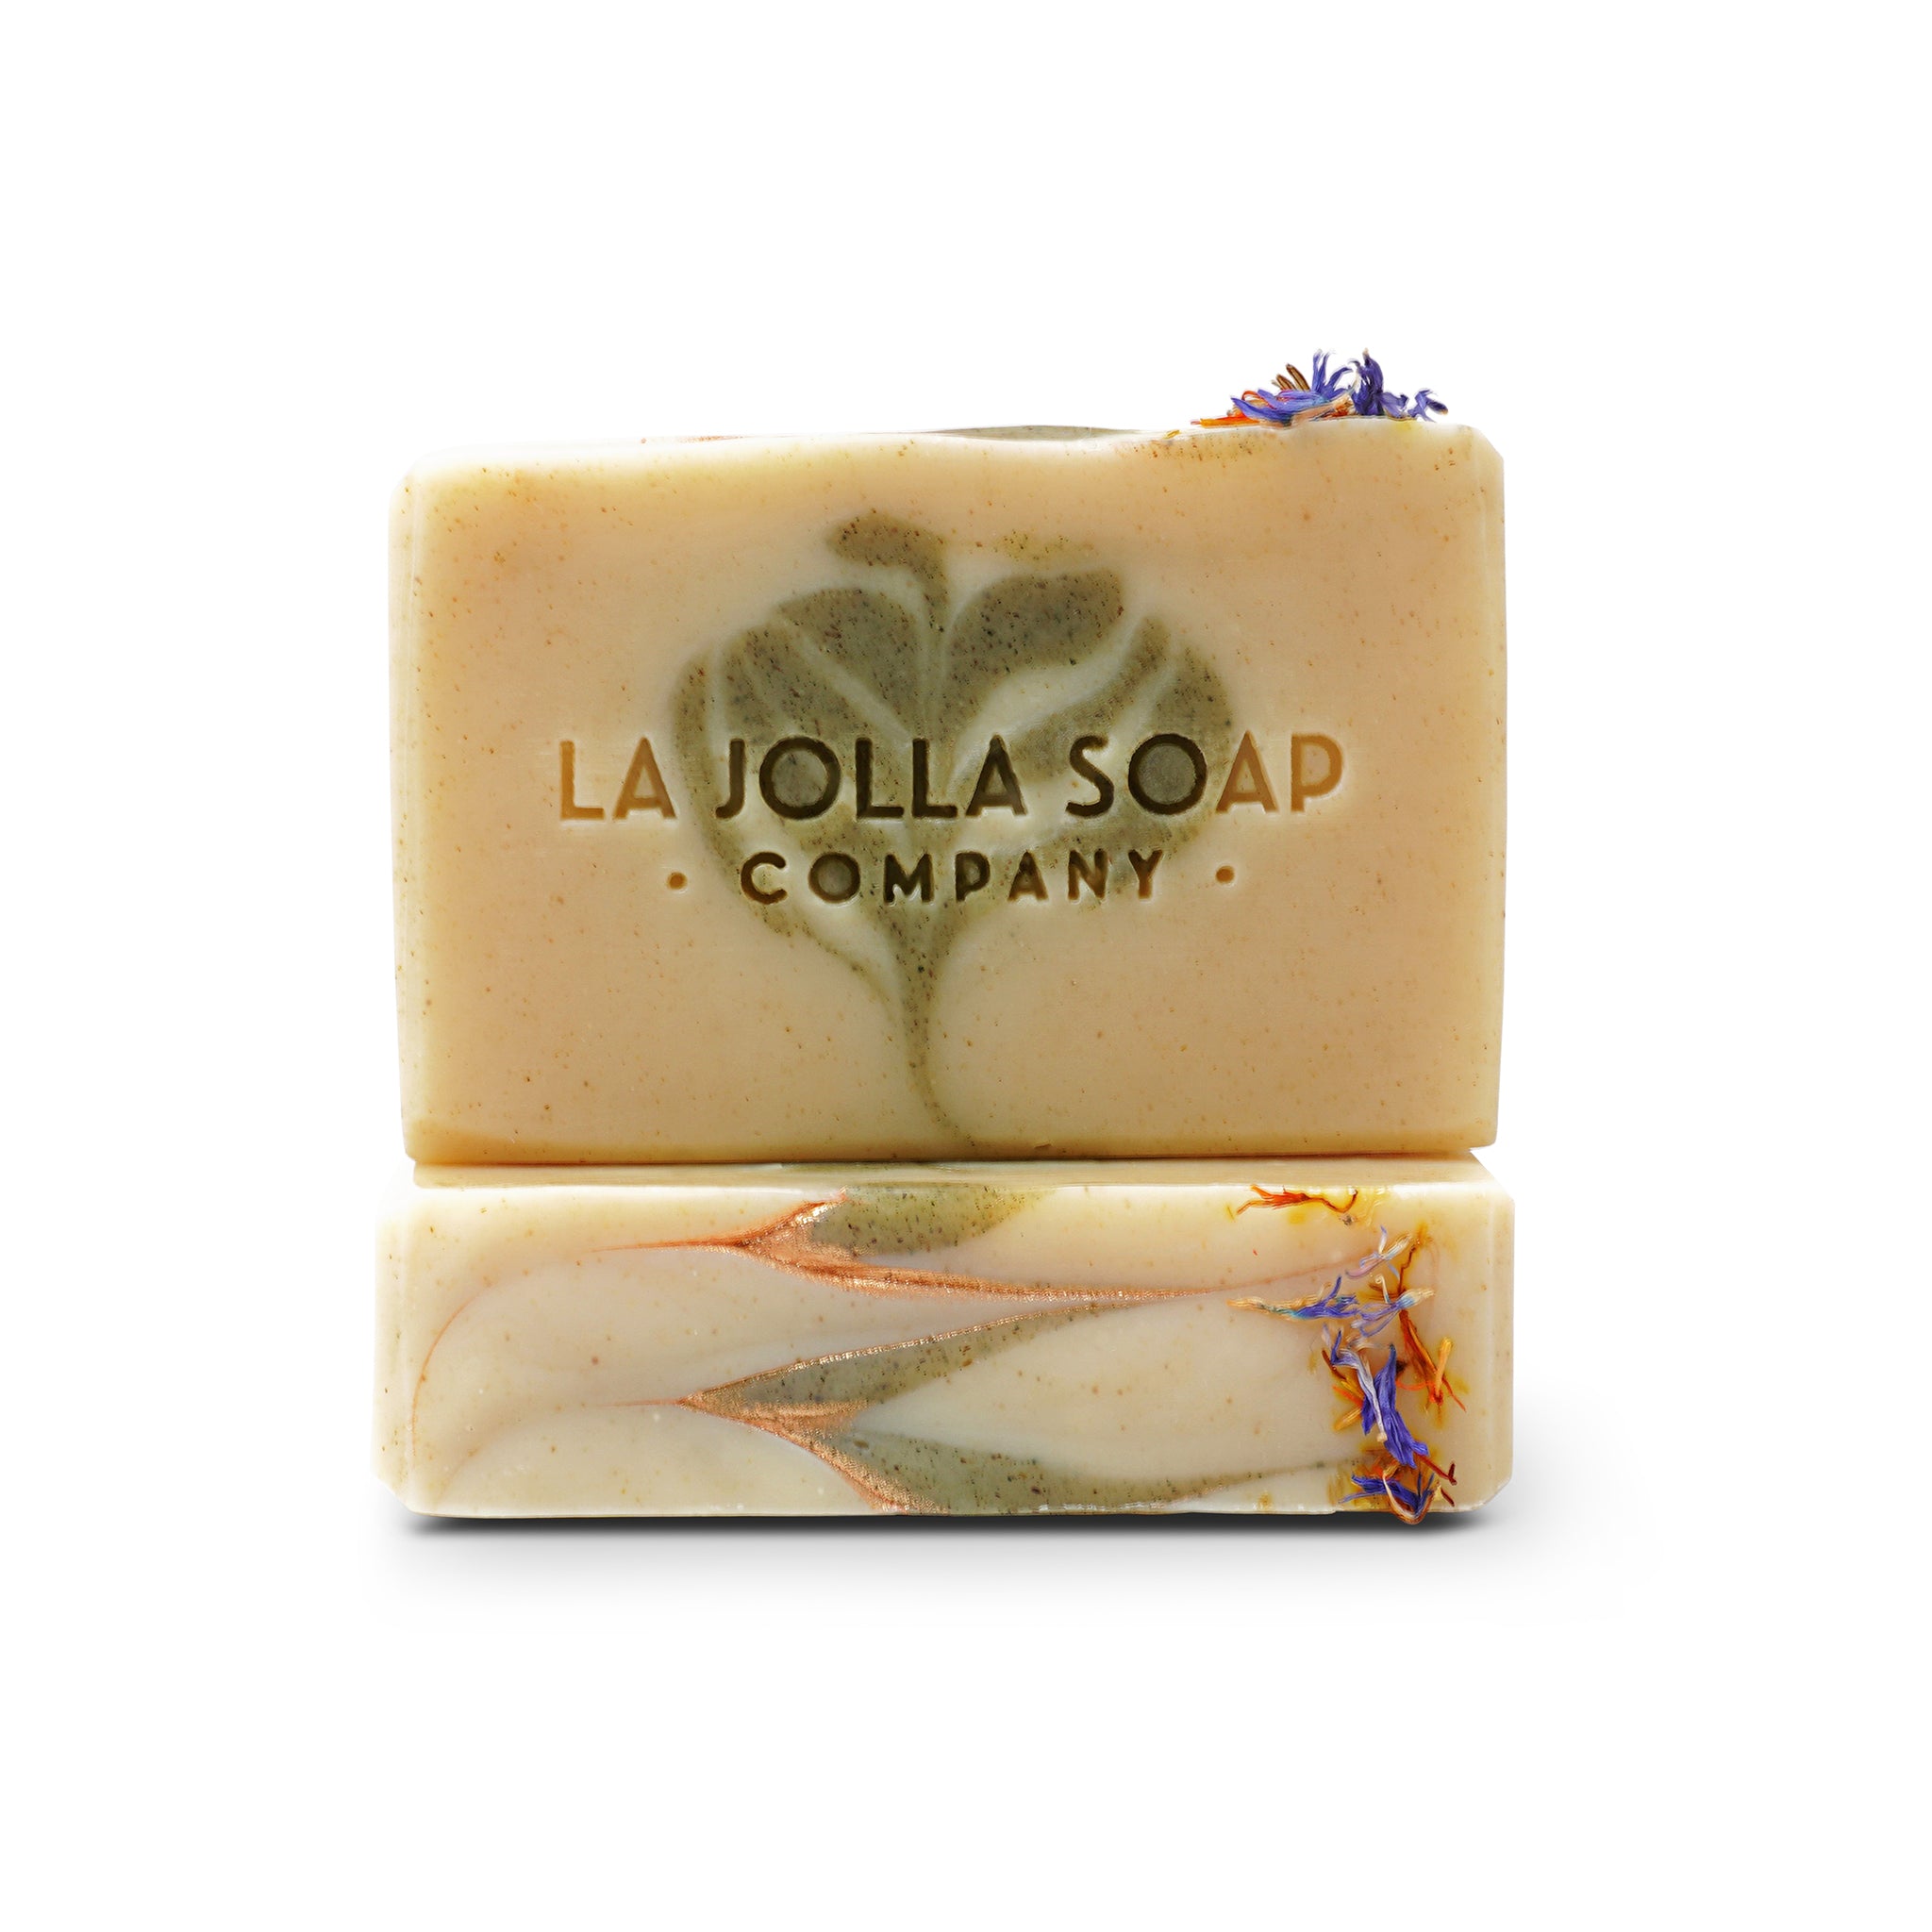 Blondie's favorite recipe from La Jolla Soap Company is Back! Made with a hydrating blend of plant-based oils and butters that your skin will love!  You will enjoy a bubbly lather leaving your skin feeling radiant and fresh.  Scented with a pure essential oil blend, creating a pleasant aromatherapy experience that uplifts your spirits and frees your mind.